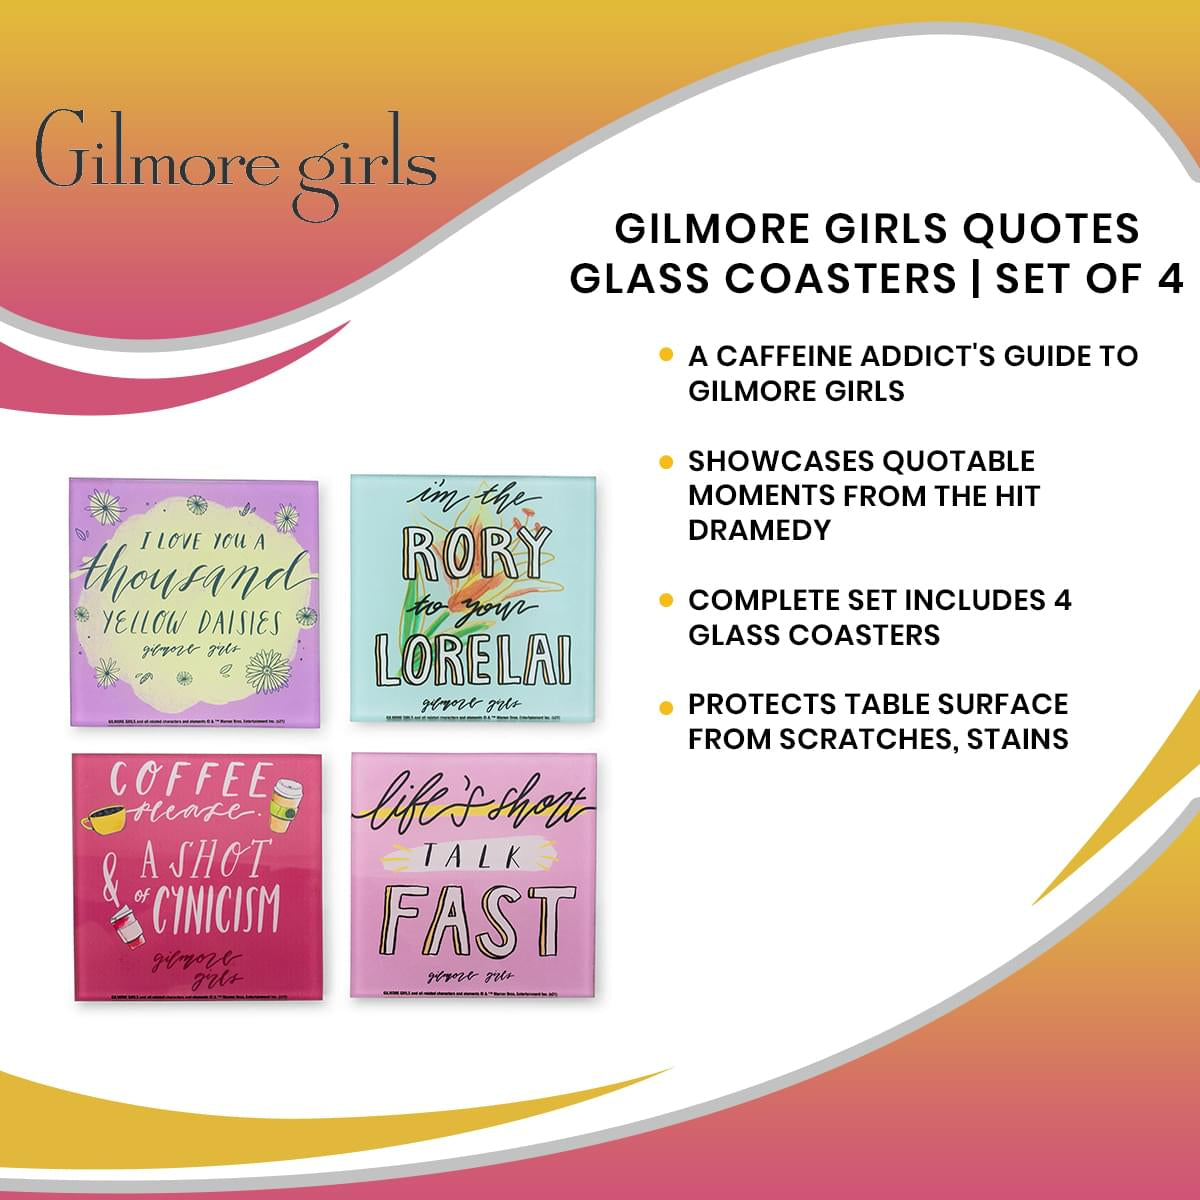 Gilmore Girls Quotes Glass Coasters | Set of 4